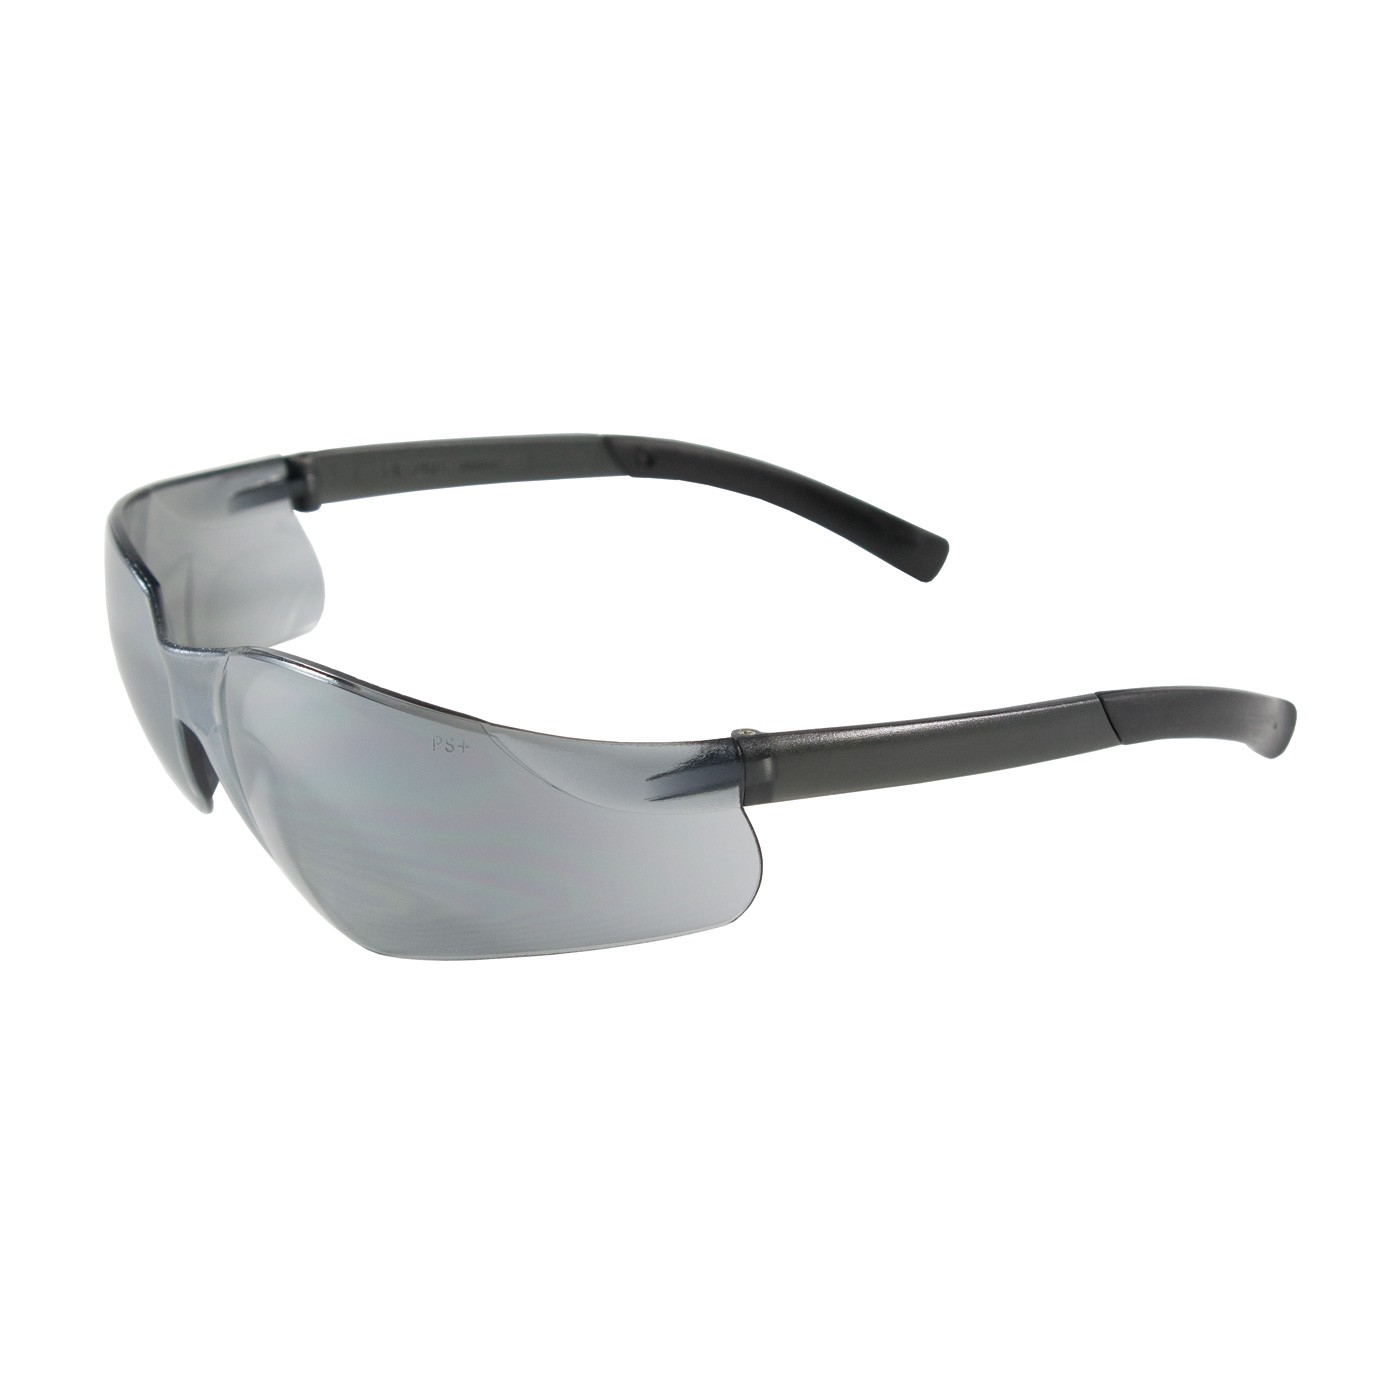  Zenon Z13™ Rimless Safety Glasses with Black Temple, Silver Mirror Lens and Anti-Scratch Coating  (#250-06-0005)